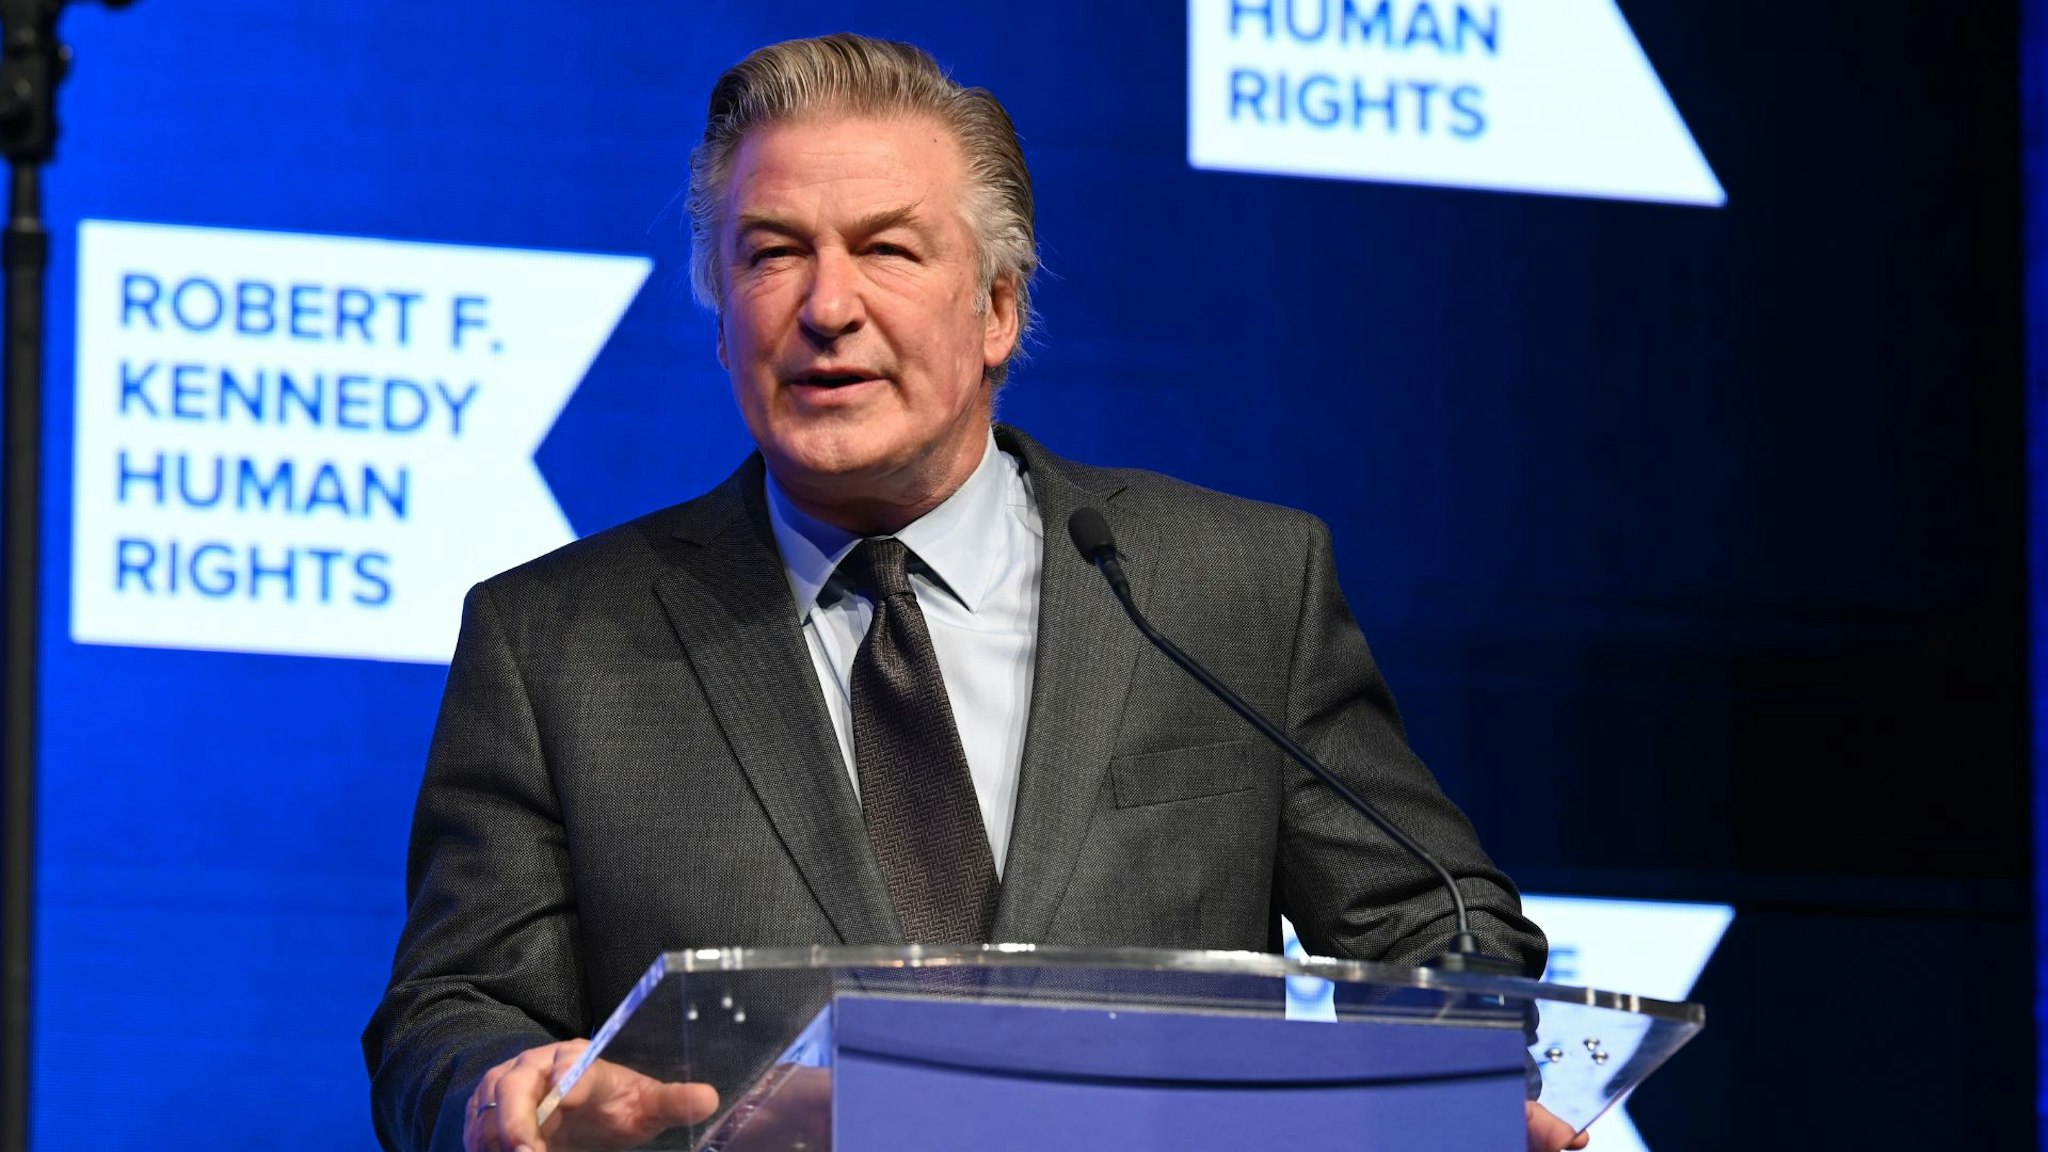 NEW YORK, NEW YORK - DECEMBER 09: Alec Baldwin speaks onstage during the 2021 Robert F. Kennedy Human Rights Ripple of Hope Award Gala on December 09, 2021 in New York City.